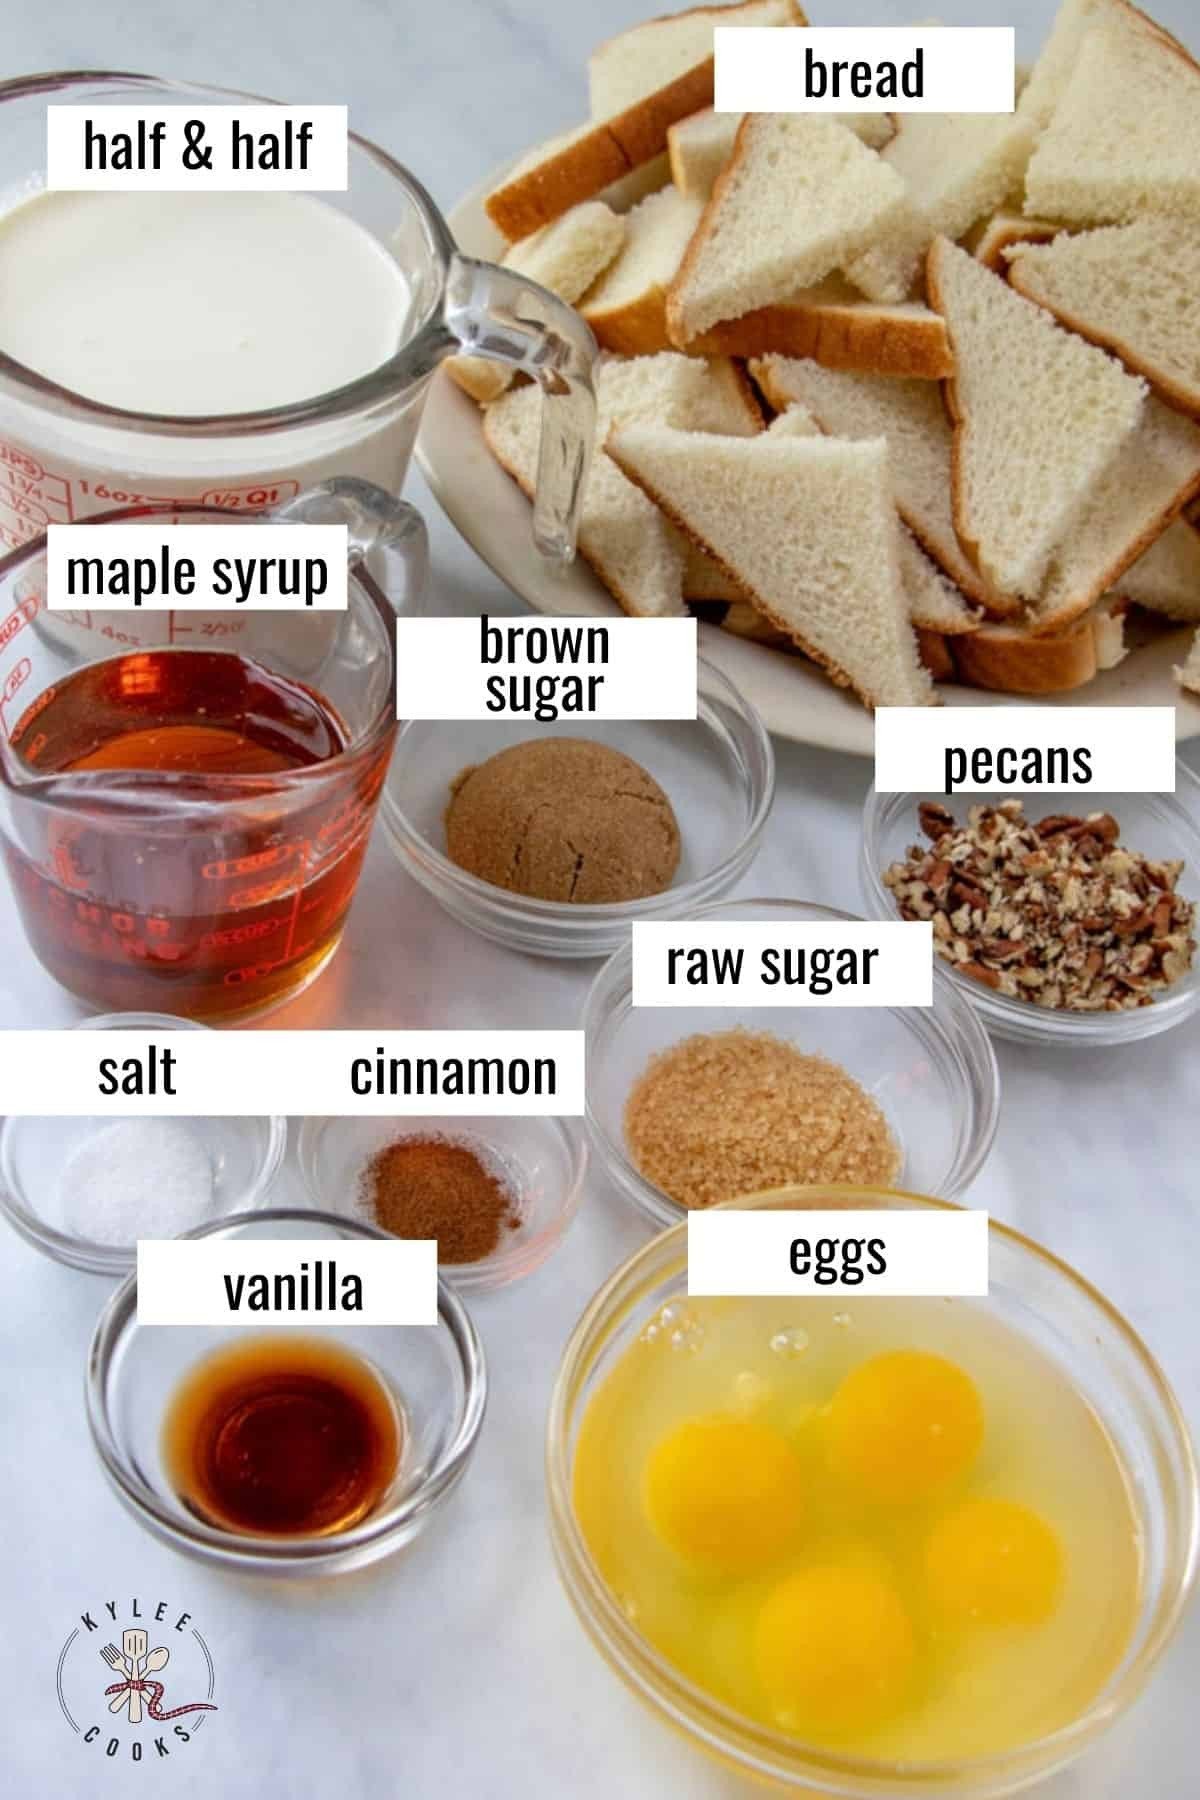 baked french toast ingredients laid out and labeled